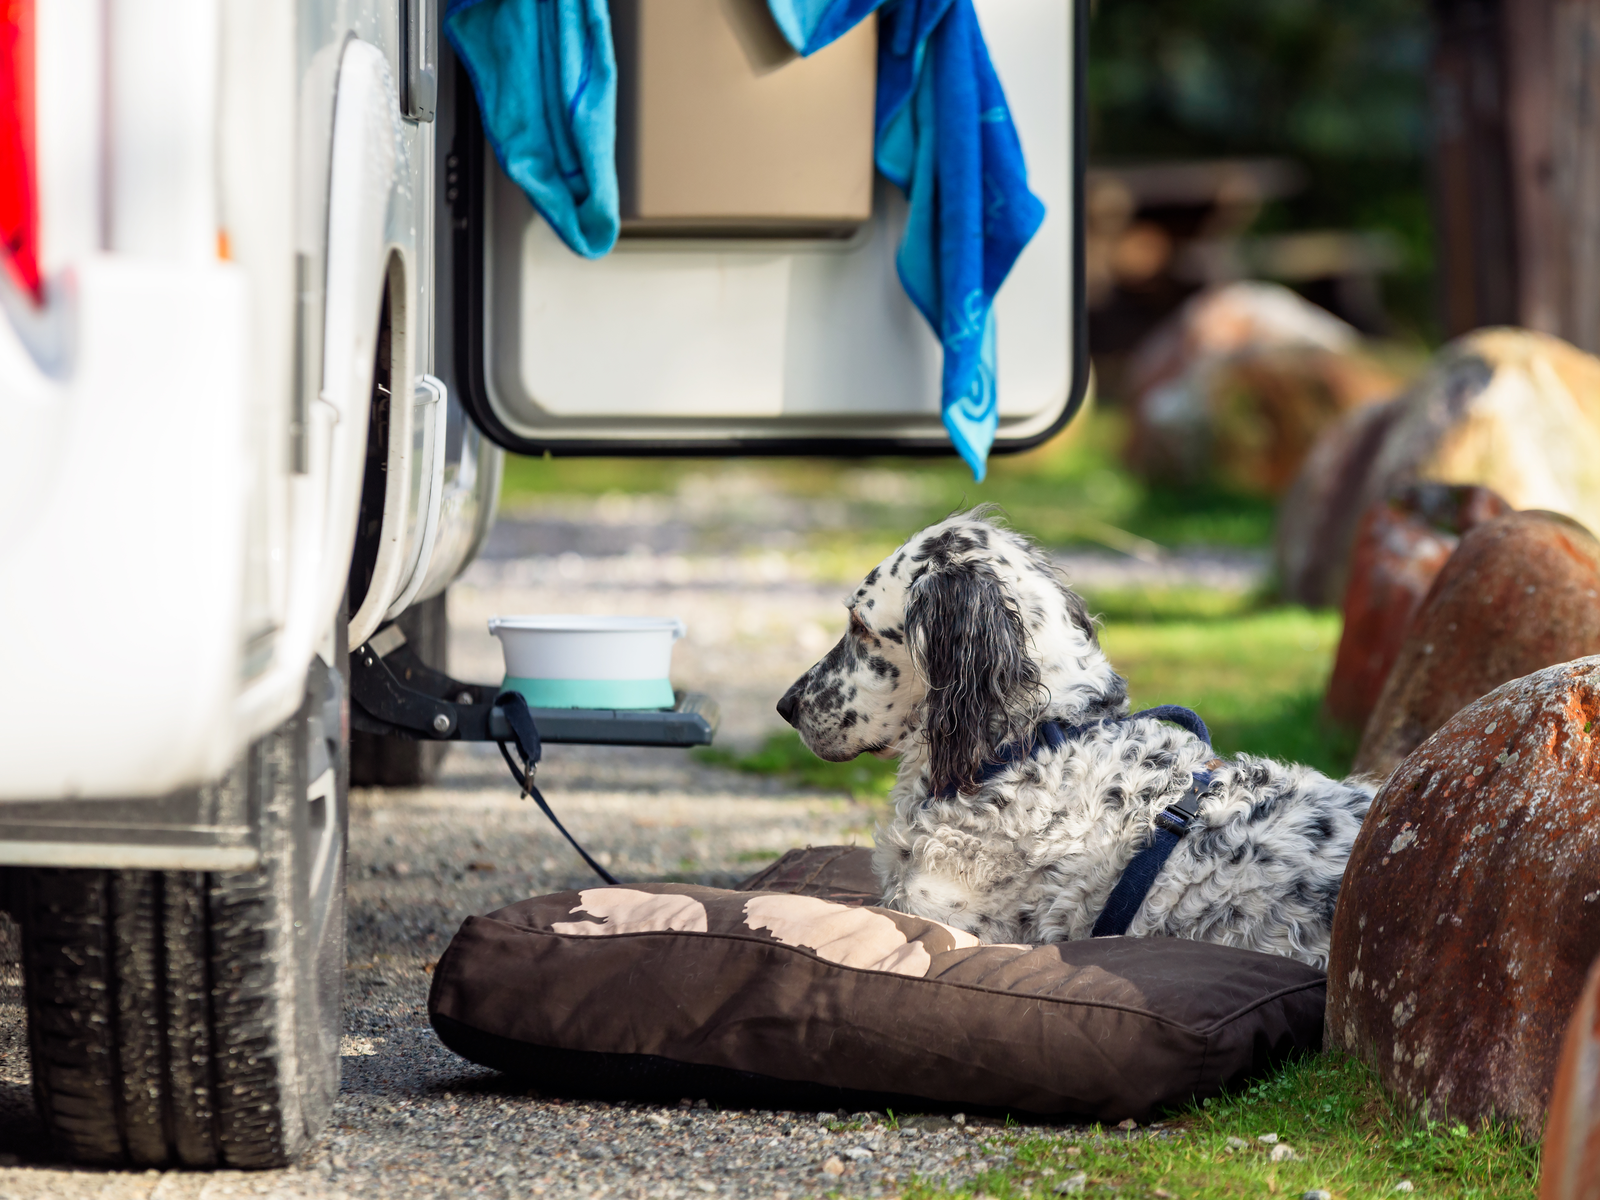 White spotted dog next to a camper on one of the best travel dog beds looking content